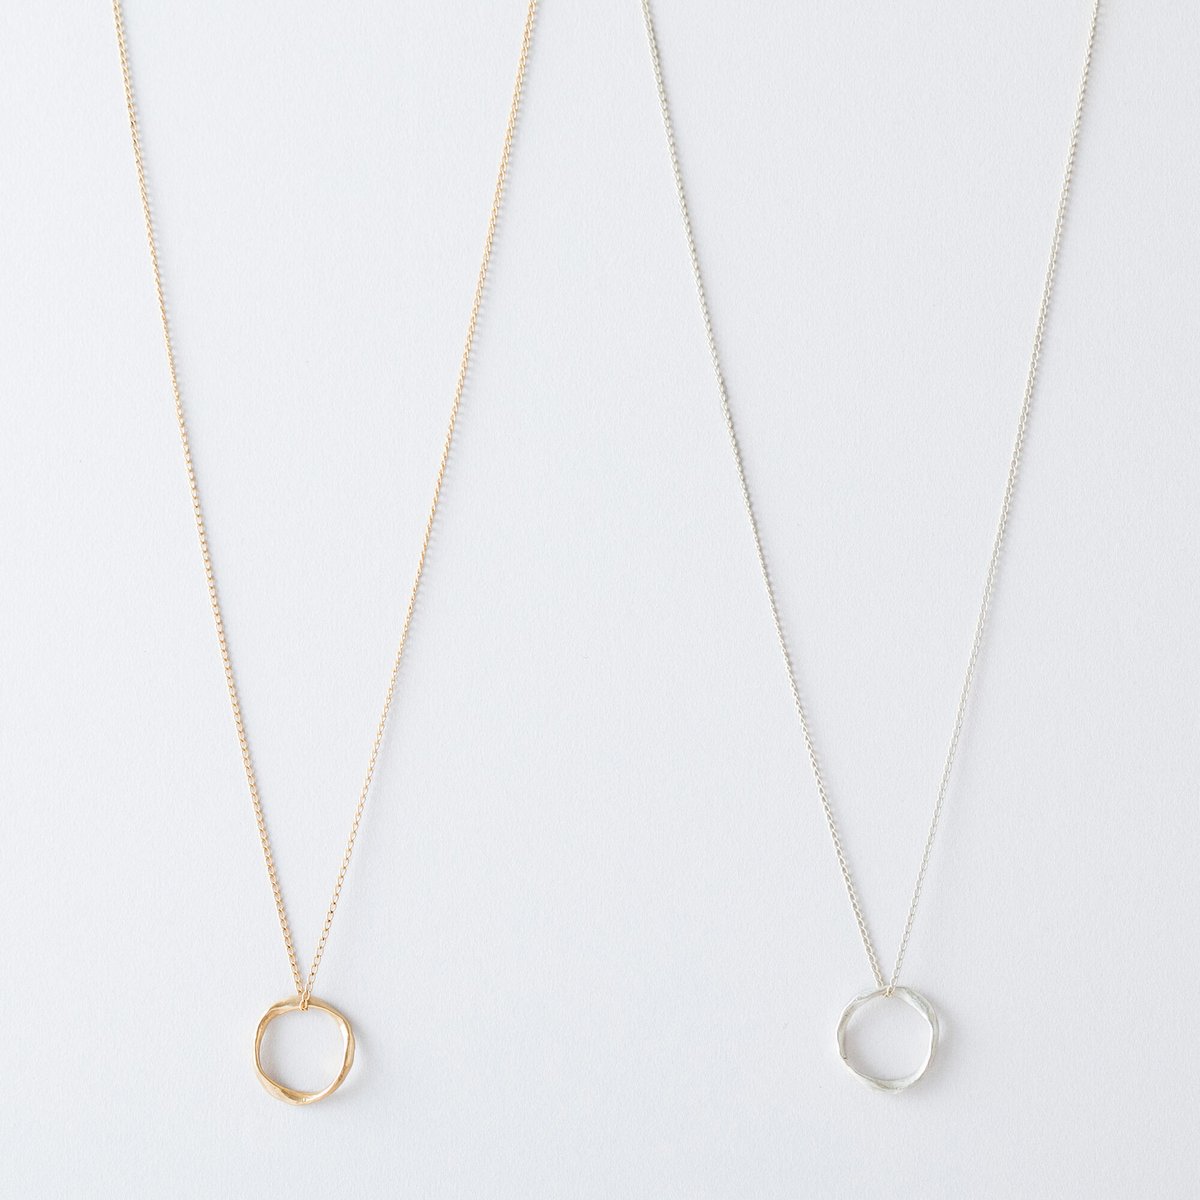 NAN069：メビウスリングネックレス / Mobius Ring Necklace